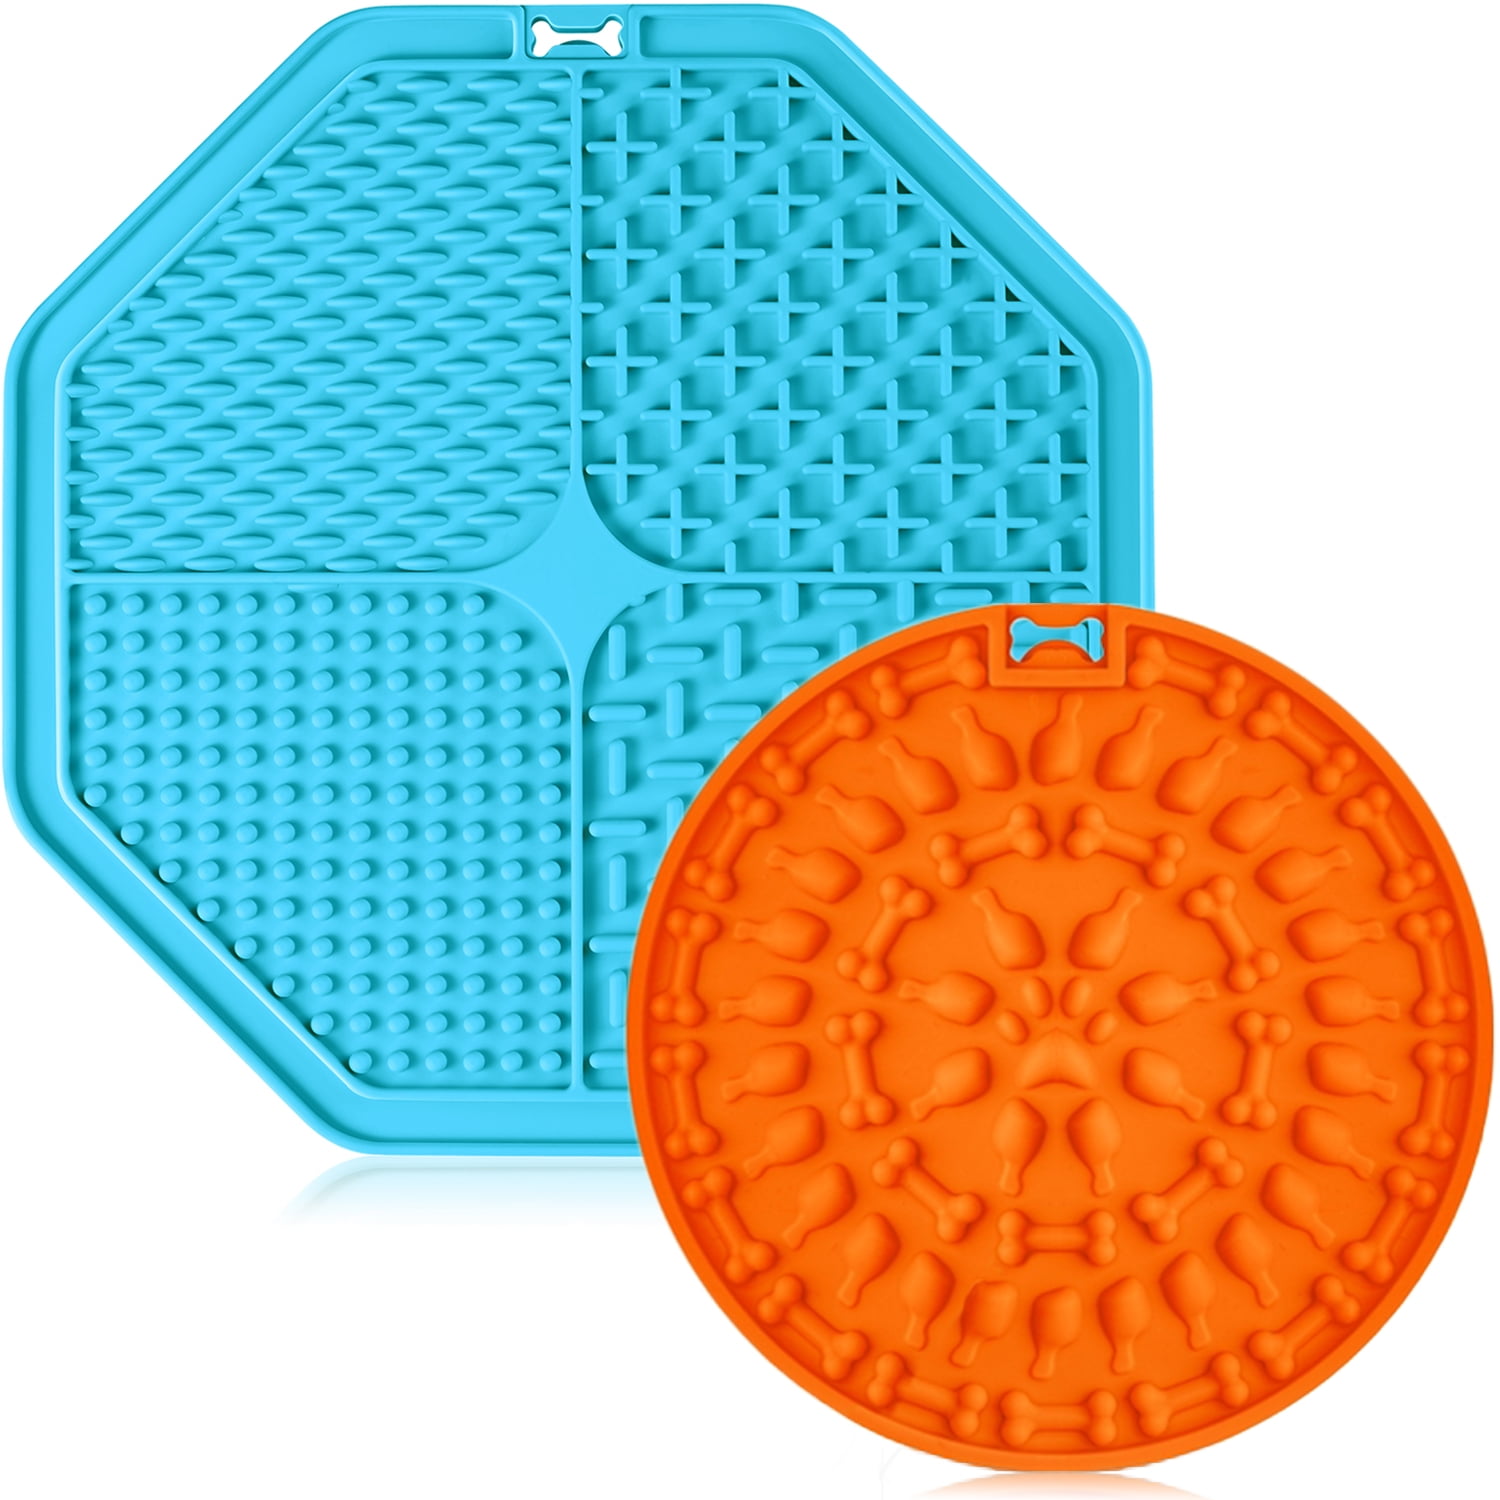 EAVPORT Dog Lick Pad, Peanut Butter Slow Feeder Lick Mat for Dogs